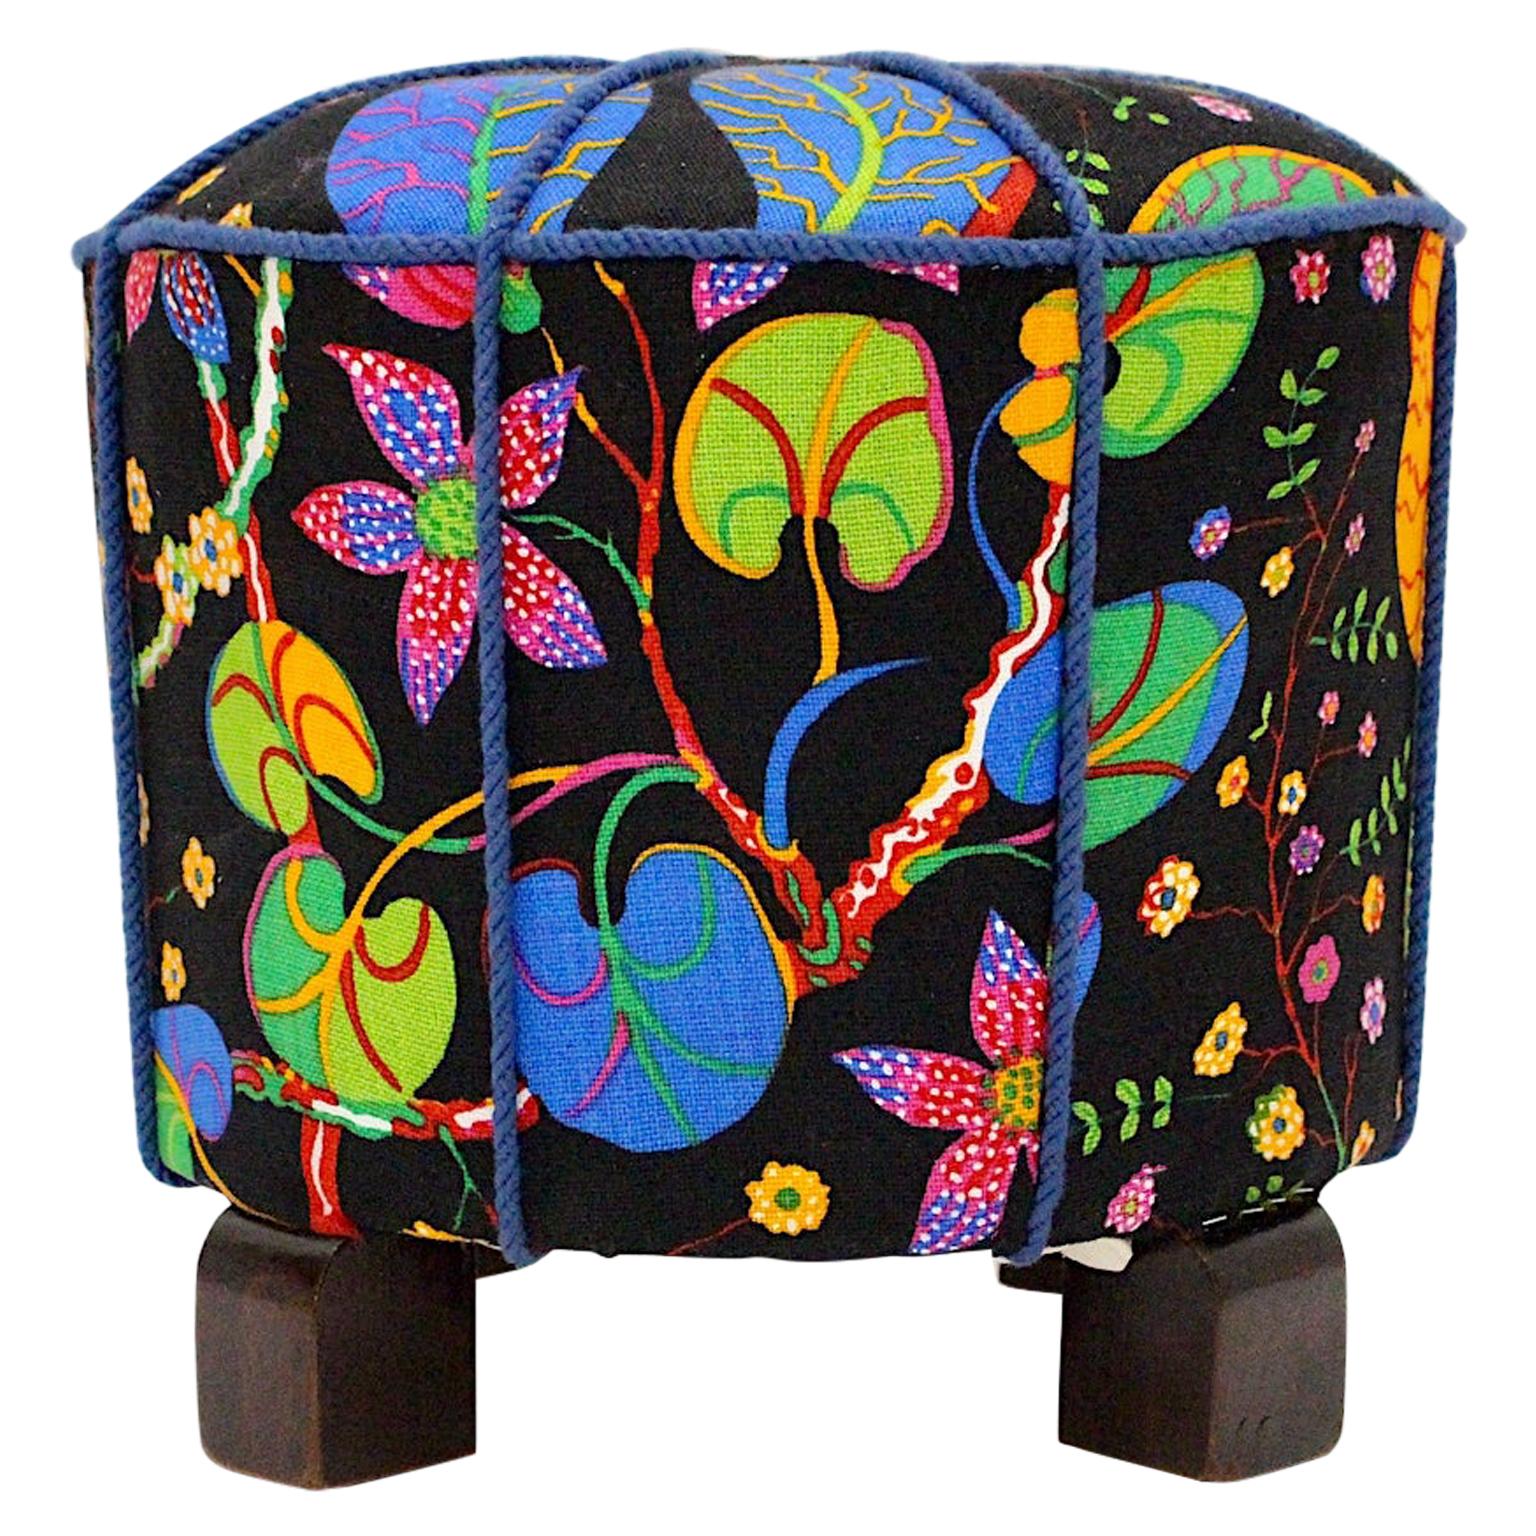 Art Deco Vintage Beech Pouf or Stool with Josef Frank Fabric, 1930s, Austria For Sale